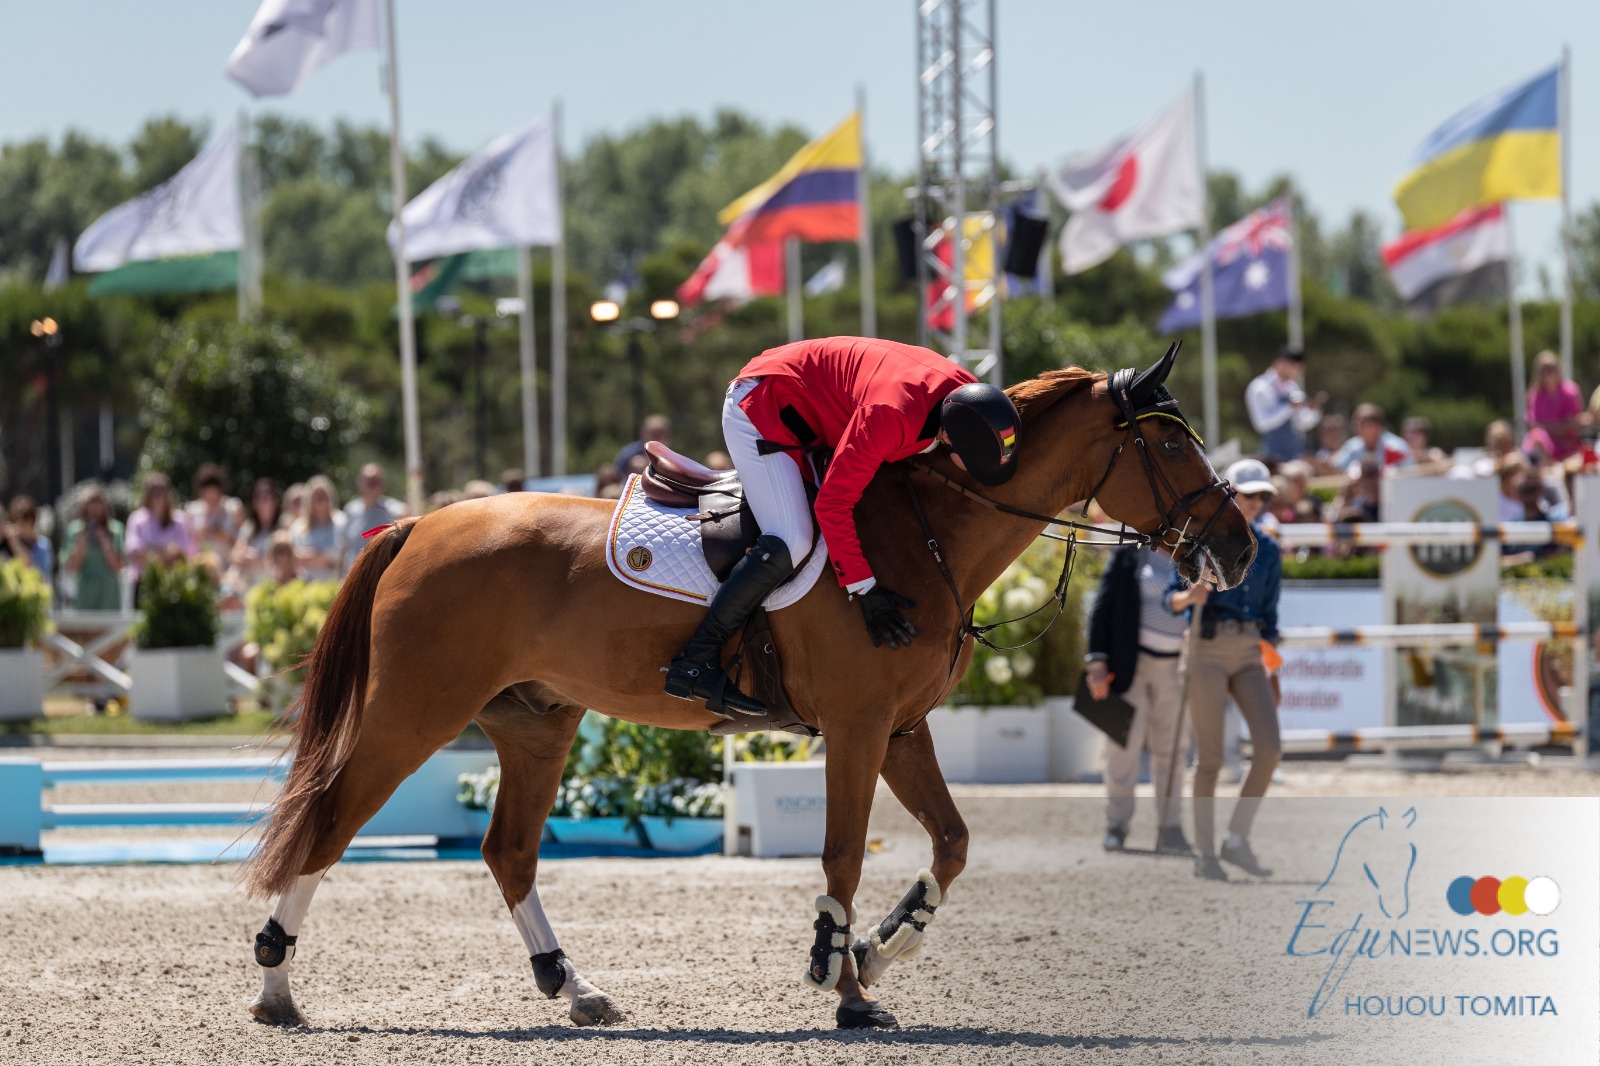 Belgium teams for World Equestrian Herning announced